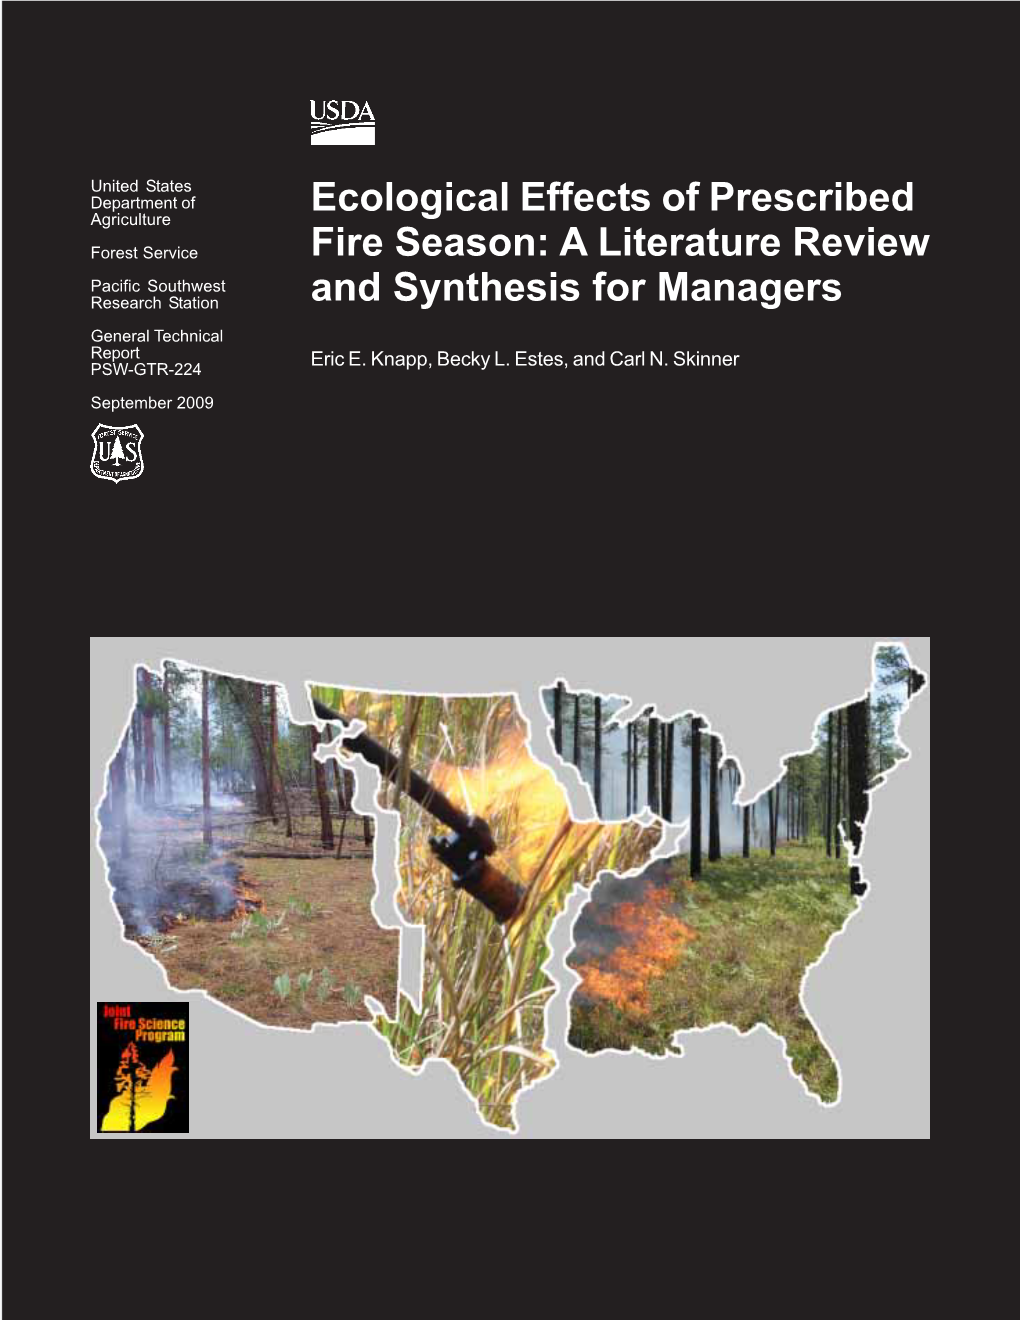 Ecological Effects of Prescribed Fire Season: a Literature Review and Synthesis for Managers